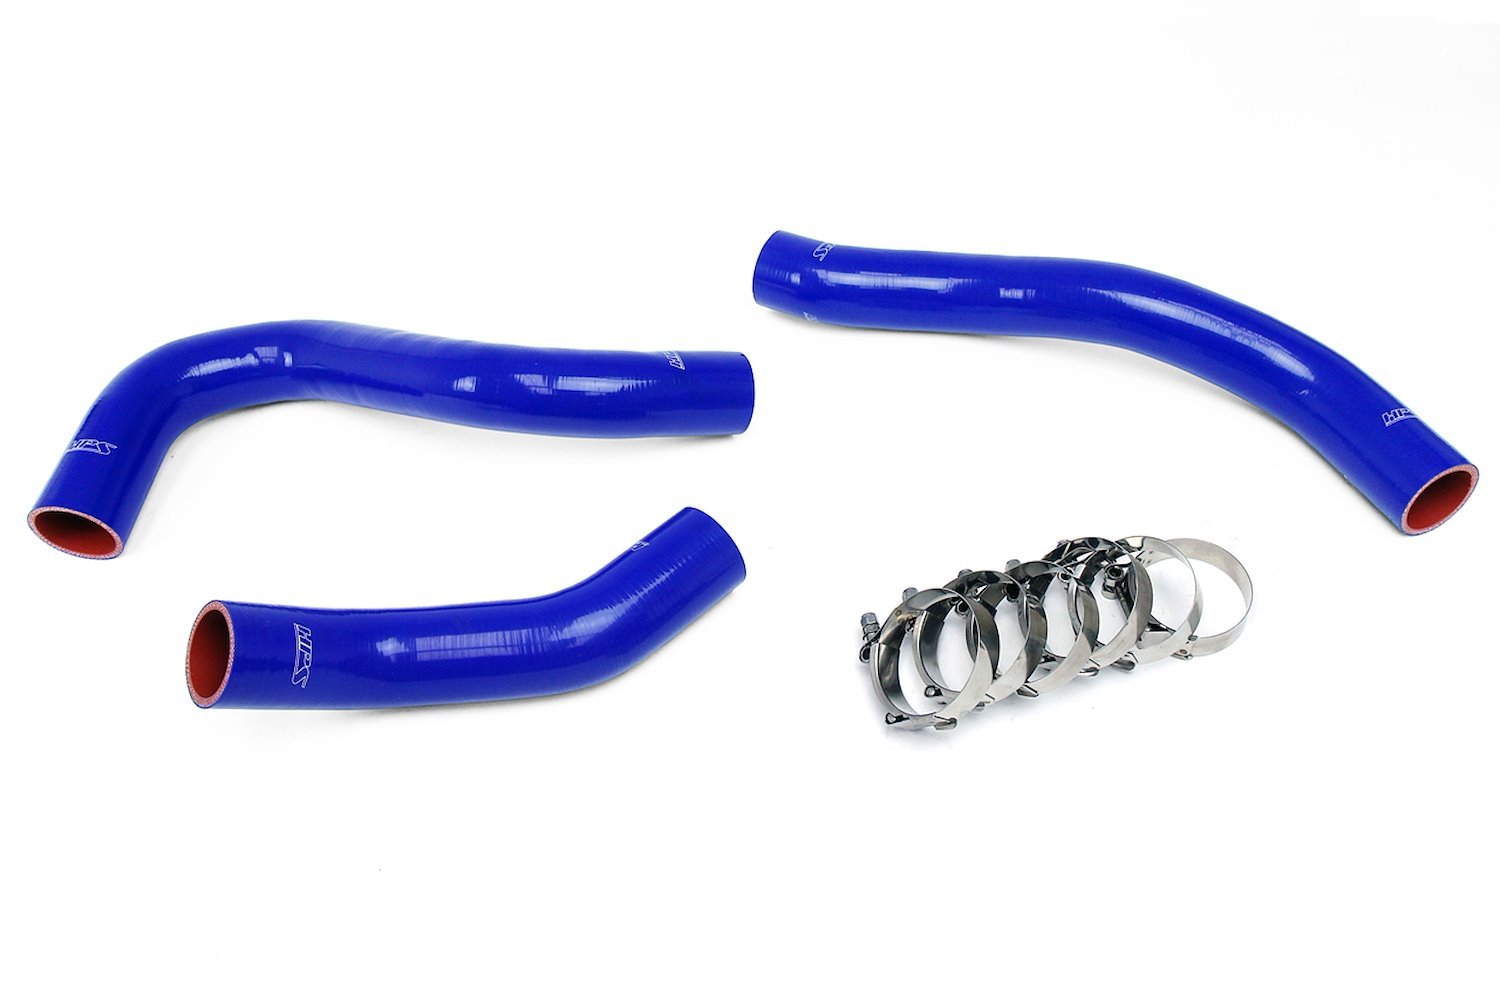 57-1457-BLUE Radiator Hose Kit, High-Temp 3-Ply Reinforced Silicone, Replace OEM Rubber Radiator Coolant Hoses